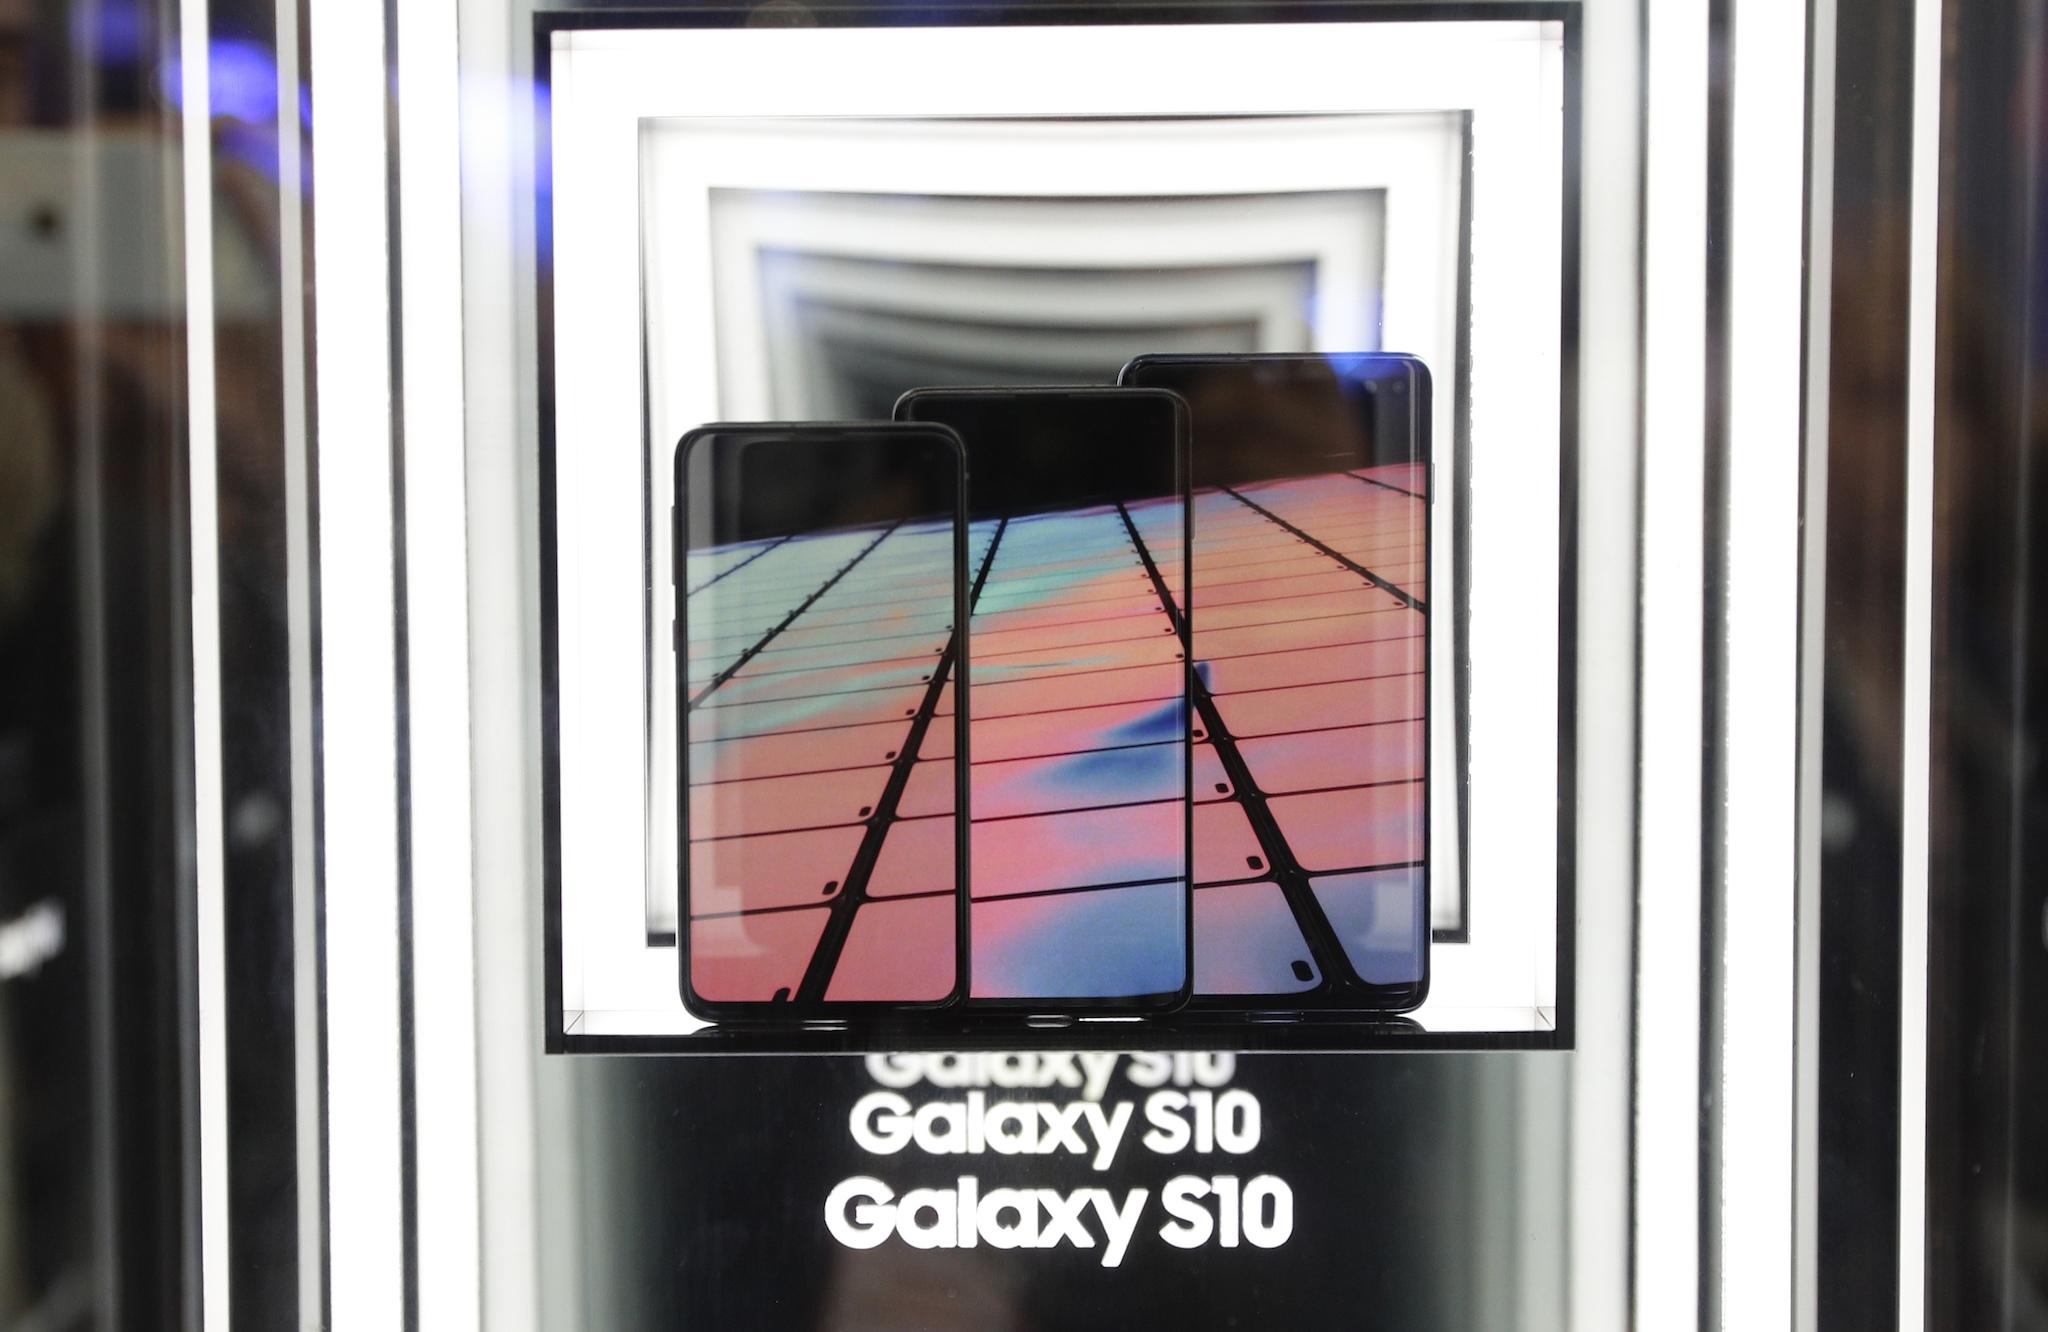 Samsung Galaxy S10 Deals Best Uk Network Offers From Ee O2 Virgin Mobile And More The Independent The Independent